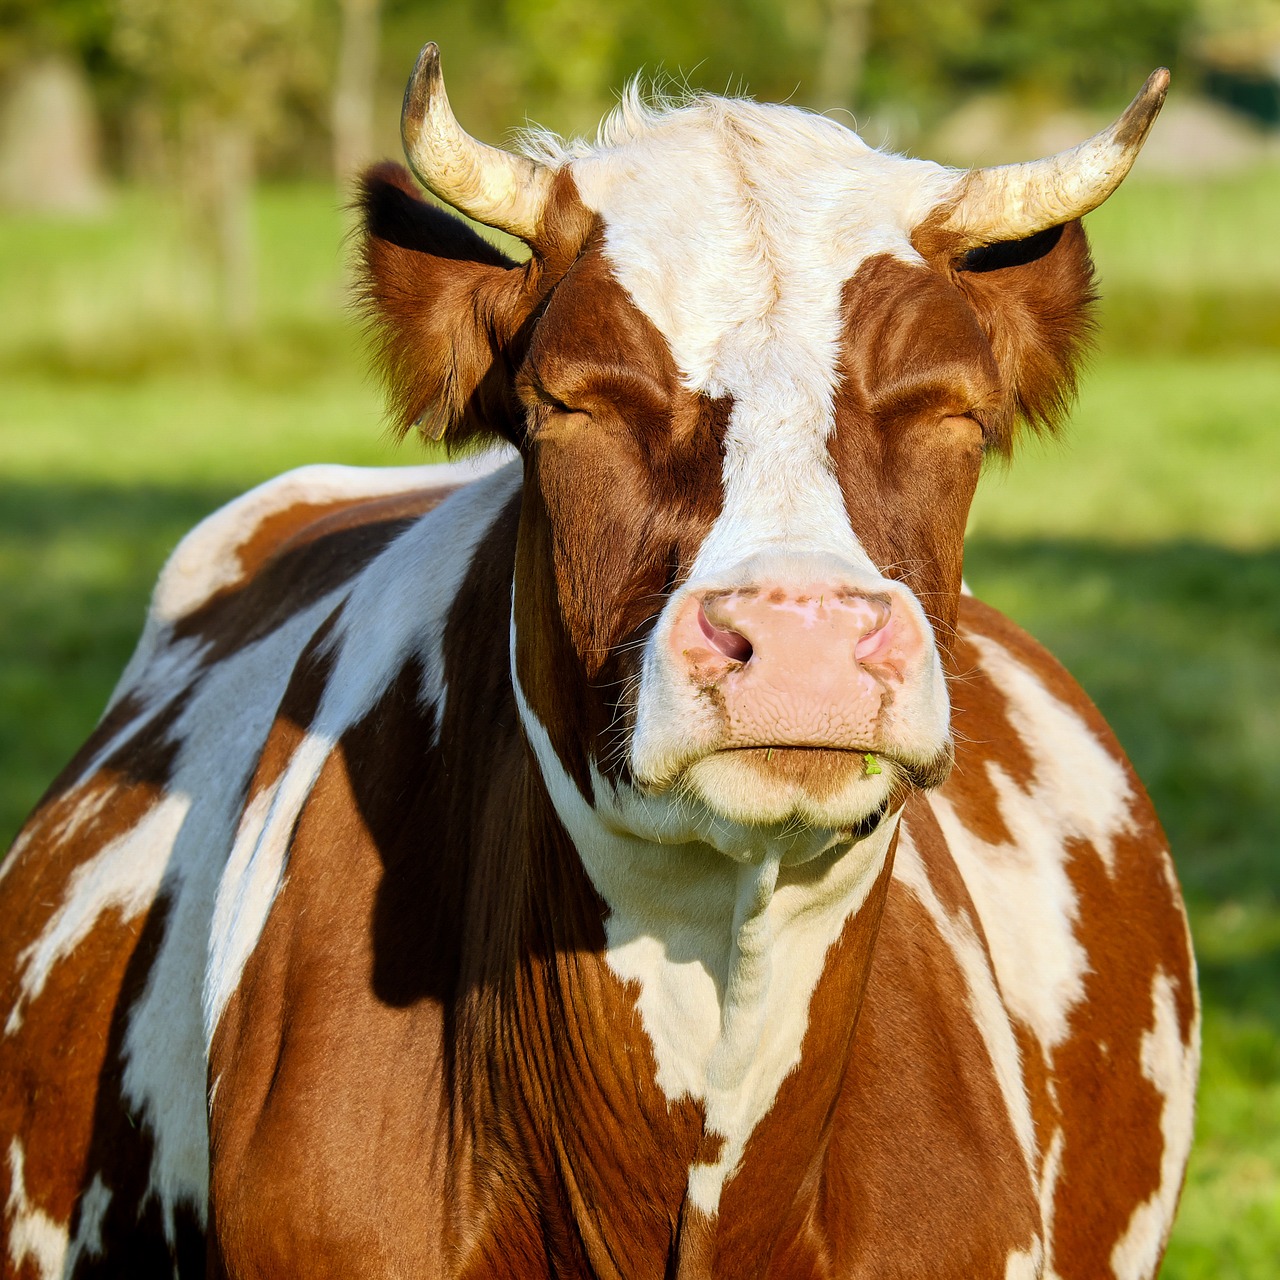 a brown and white cow standing on a lush green field, shutterstock, horns under his cheek, closeup photo, very funny, warm glow